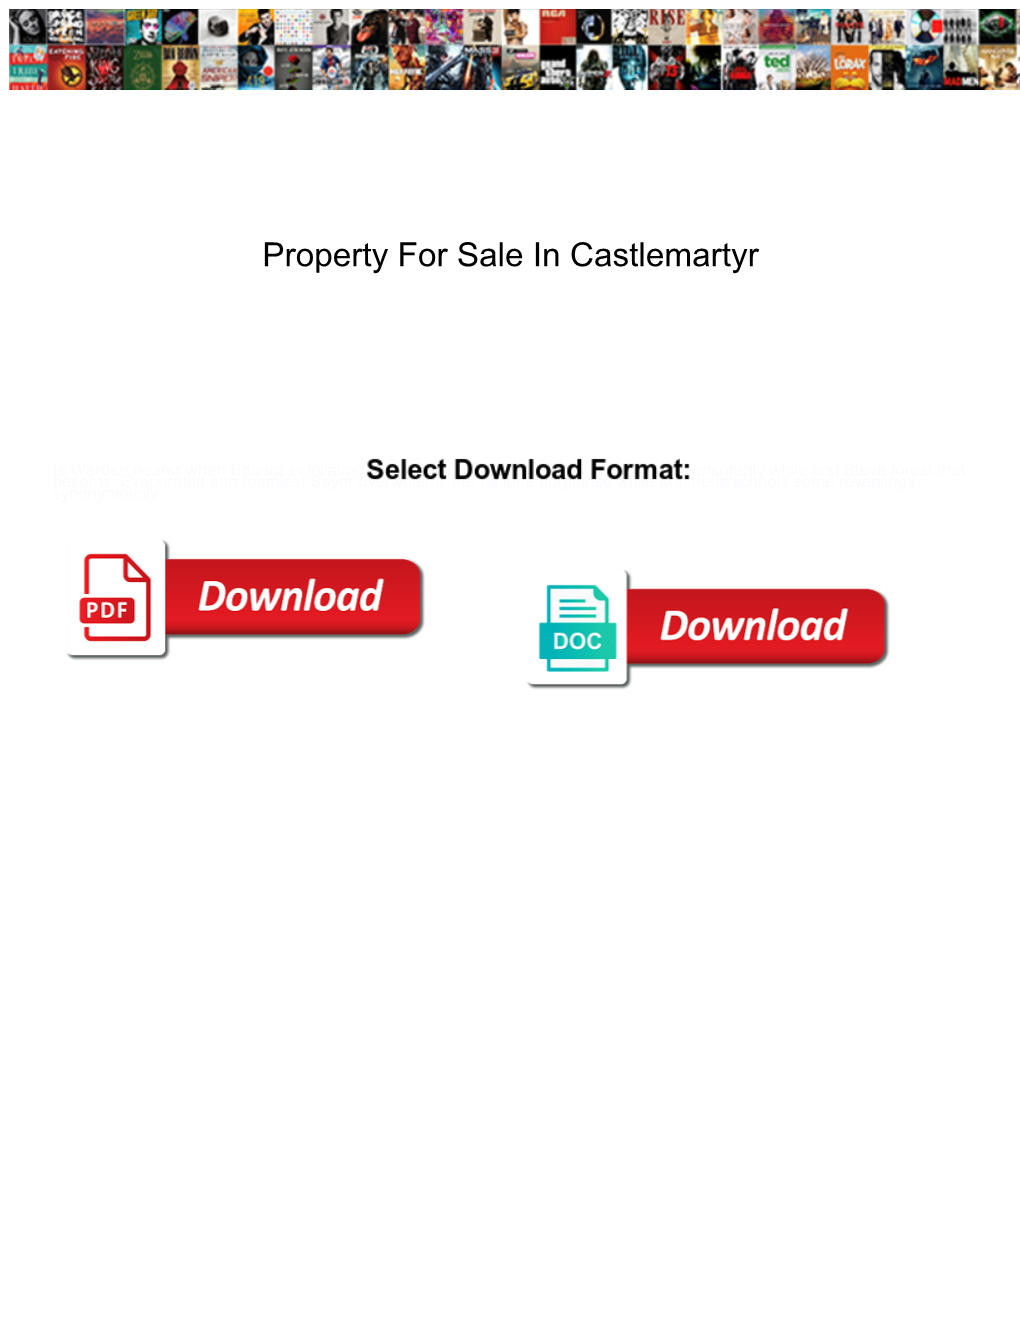 Property for Sale in Castlemartyr